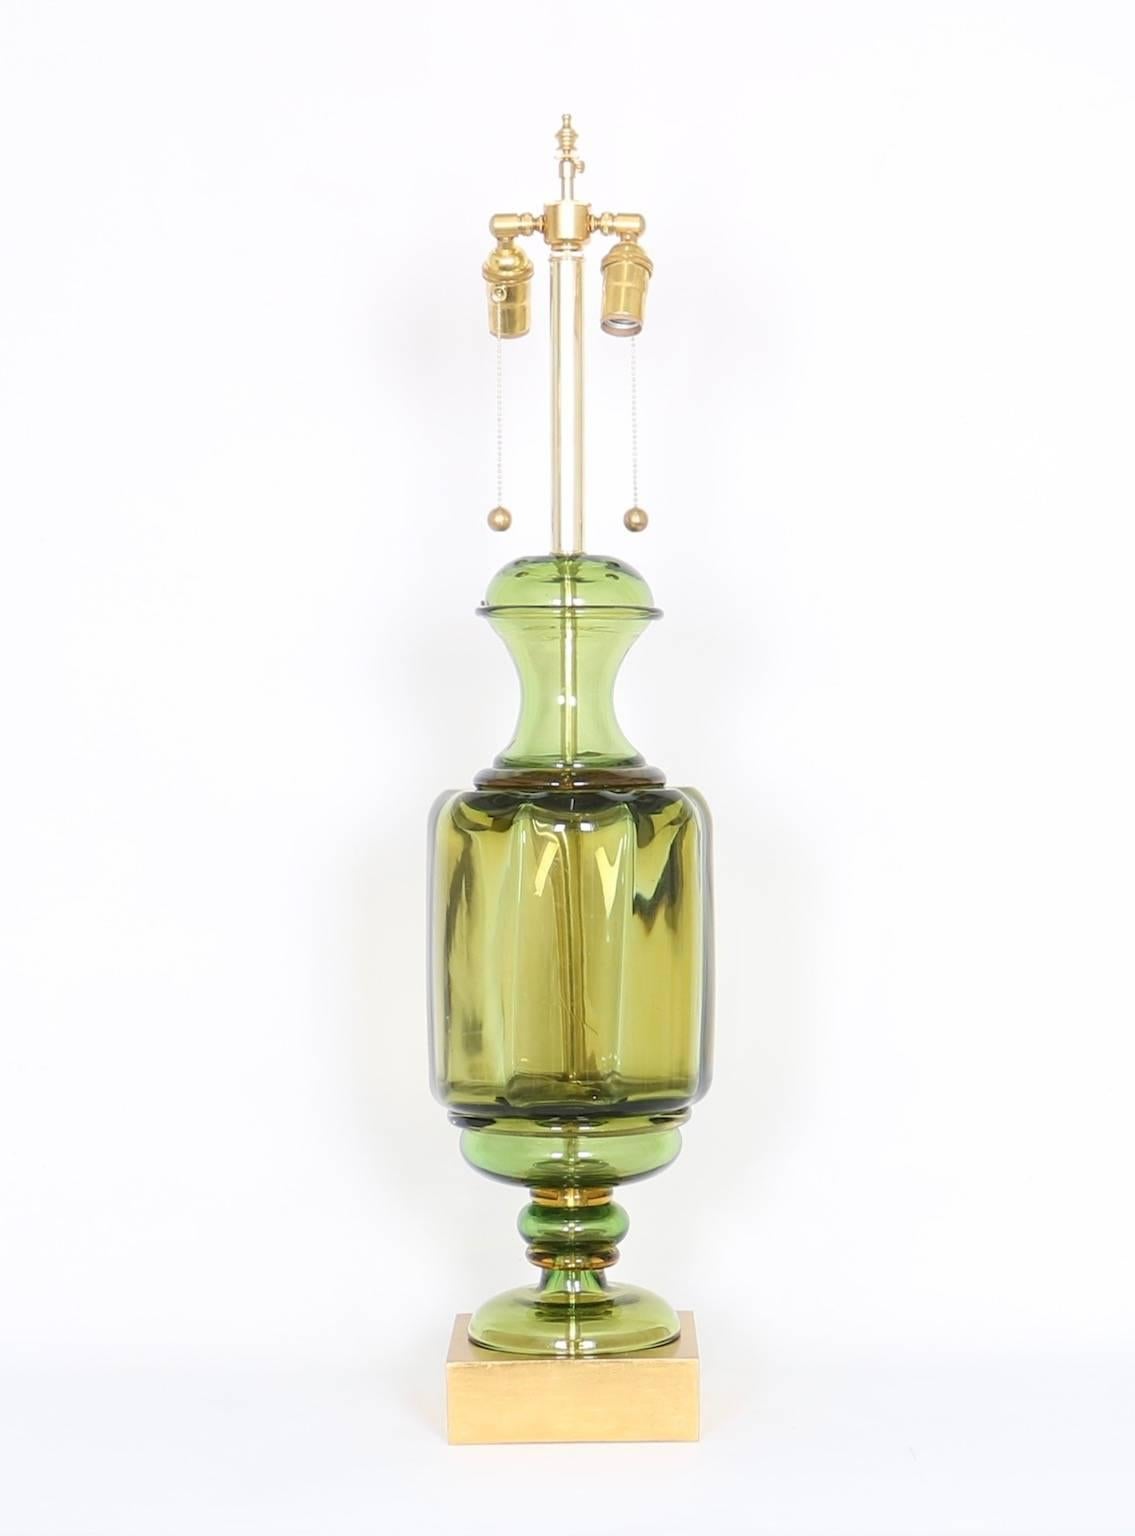 An Italian table lamp by Seguso for Marbro Lamp Company, with double cluster sockets on clear green urn form Murano glass body, raised on gilded wood base, circa 1950s. The dimensions provided reflect height to the finial; height to the top of the